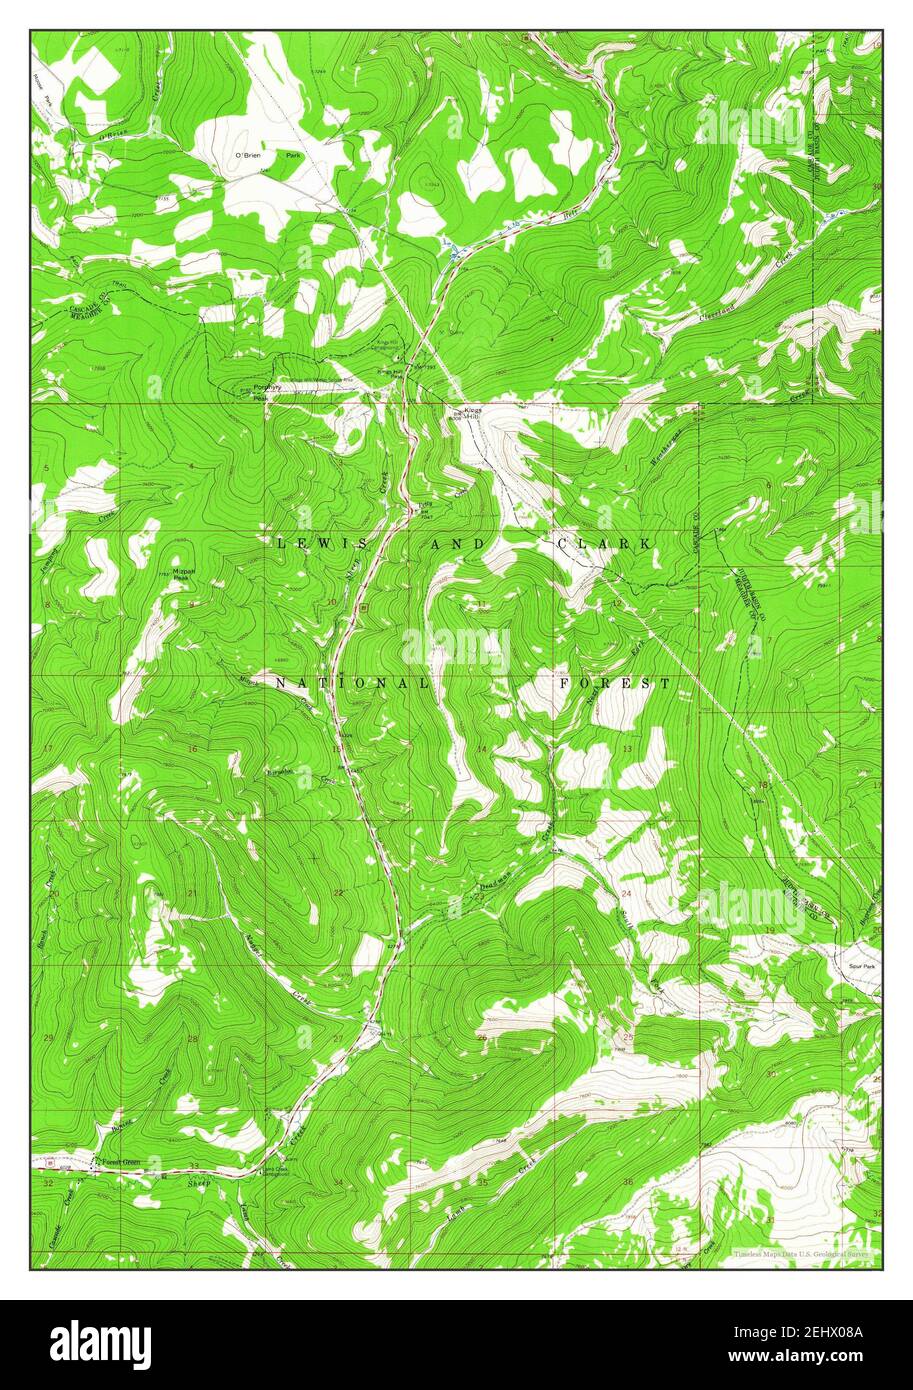 Kings Hill, Montana, map 1961, 1:24000, United States of America by Timeless Maps, data U.S. Geological Survey Stock Photo